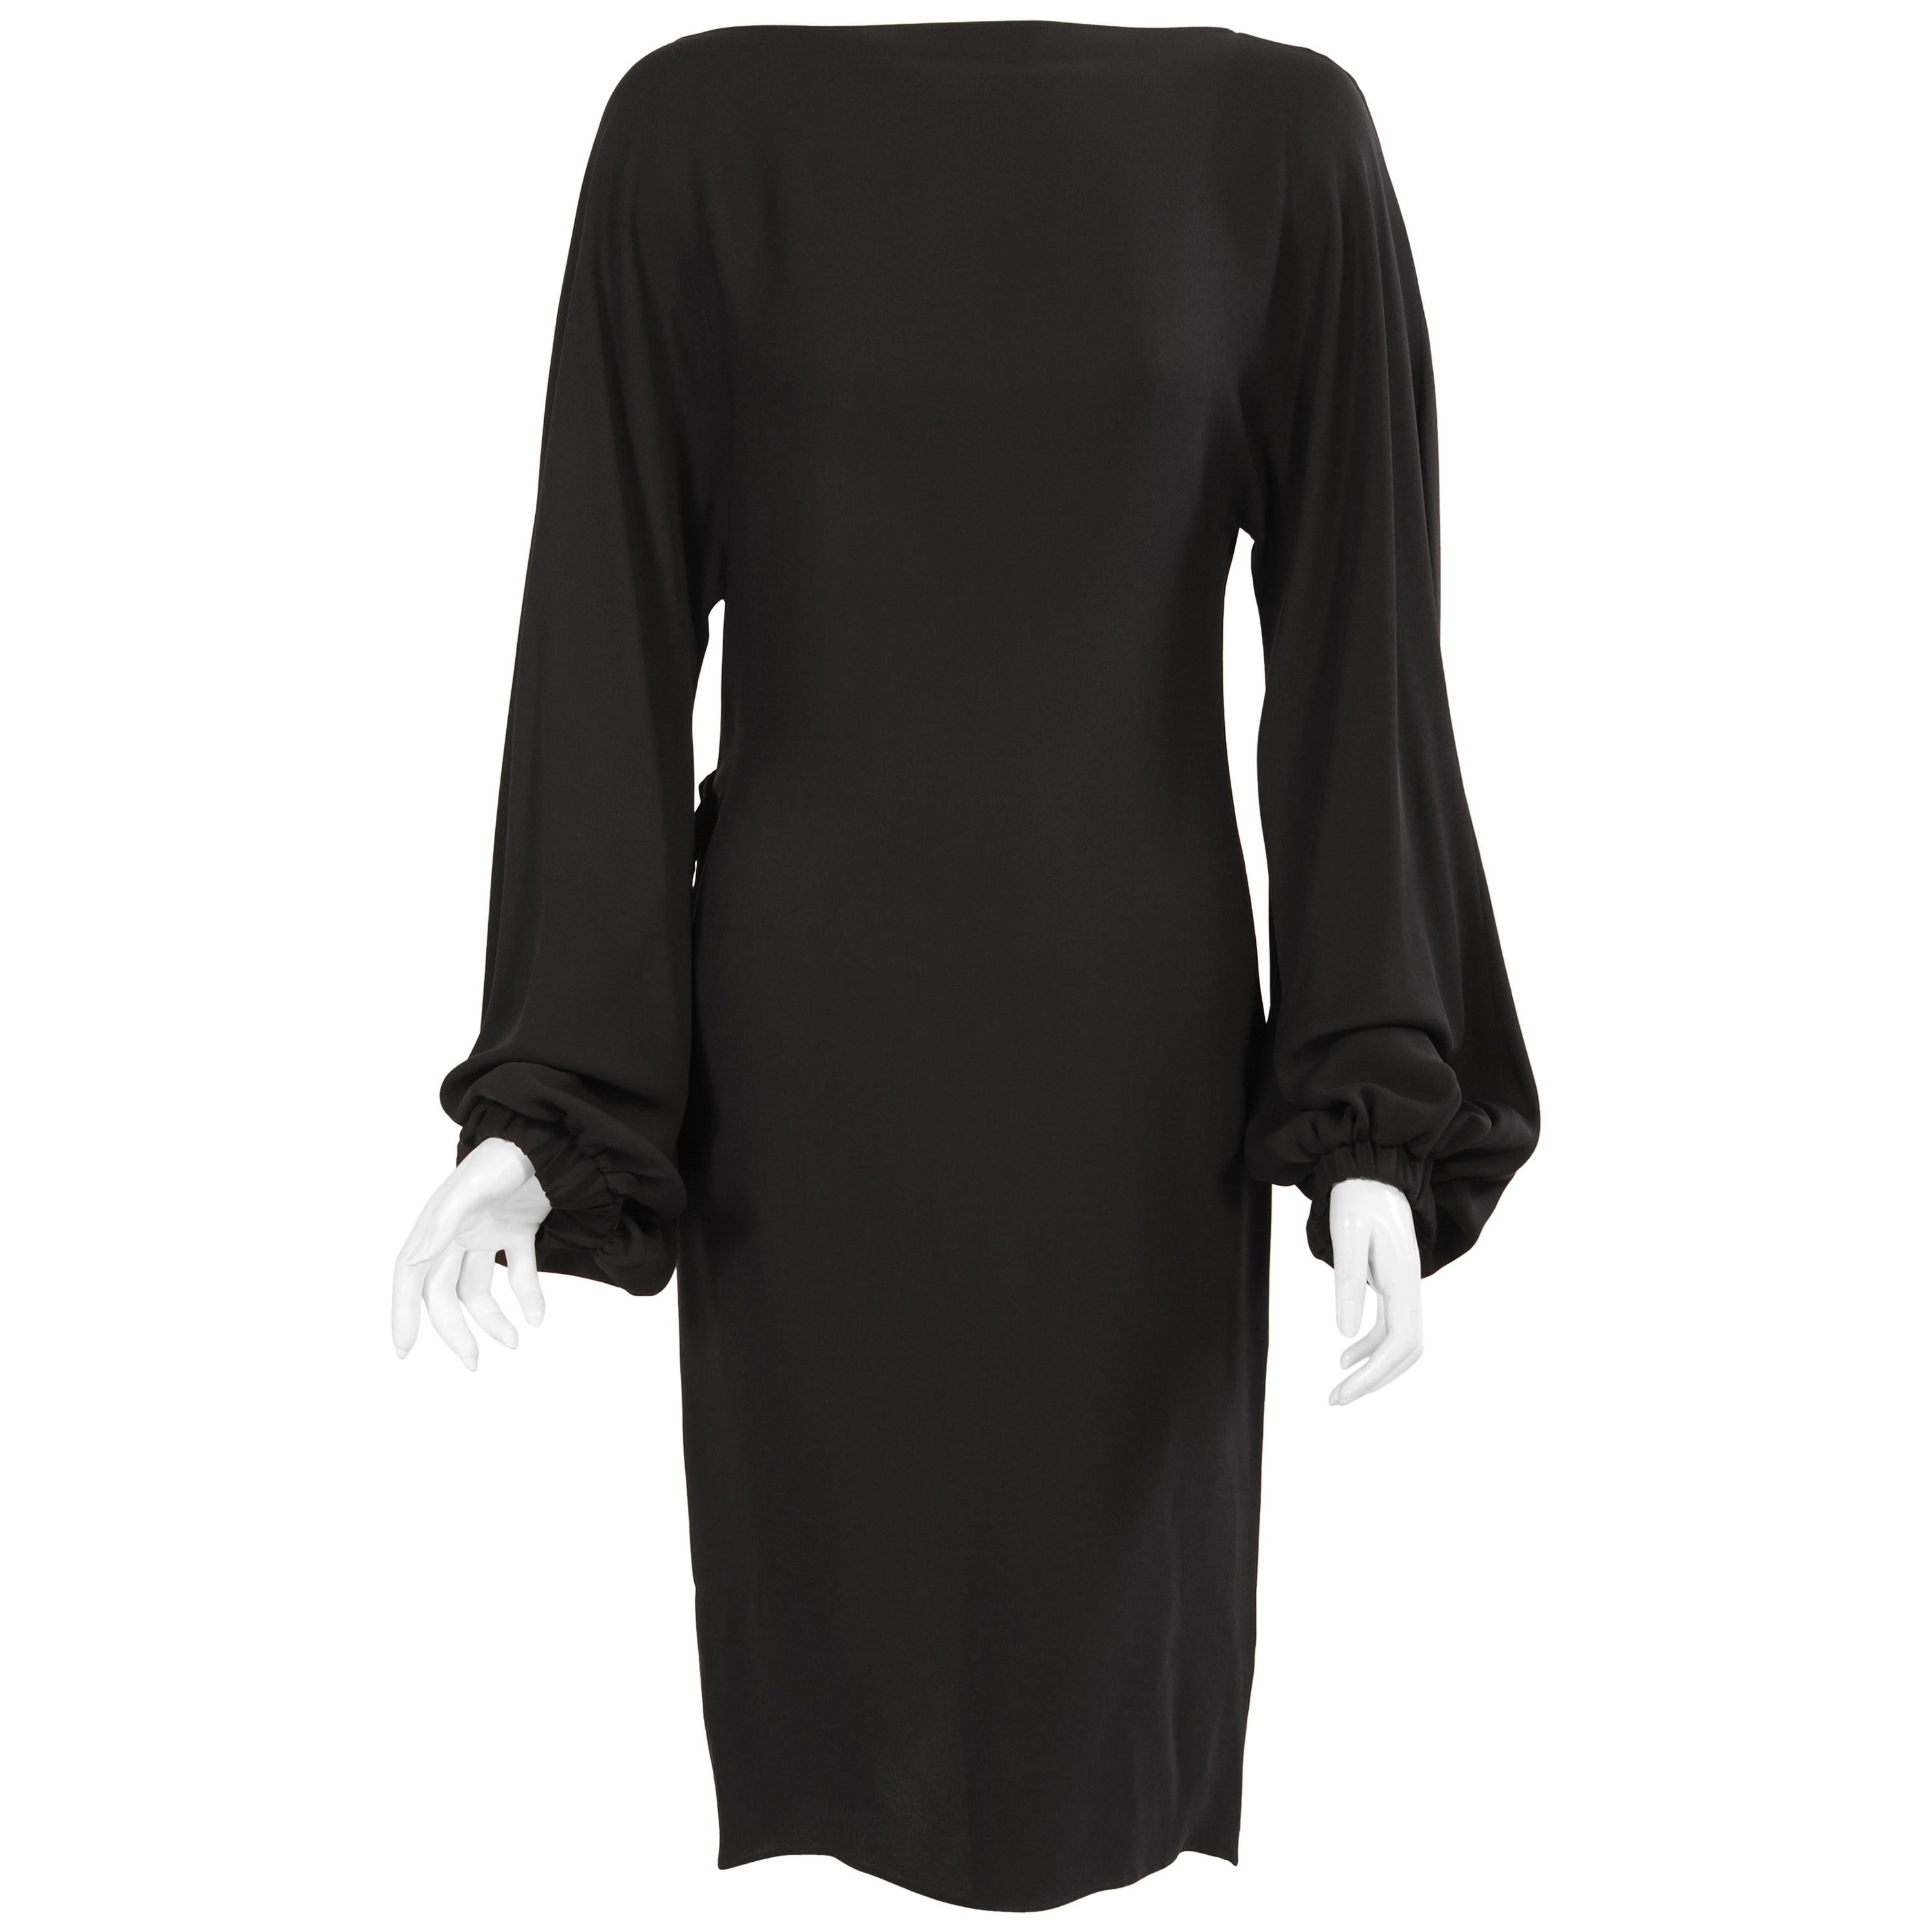 Classic and elegant at first glance, this dress is cut to there in the back. The simple bateau neckline and long sleeves gathered at the wrist are the perfect foil for the drama of the wrap back of this dress.  It goes left to right with a hidden